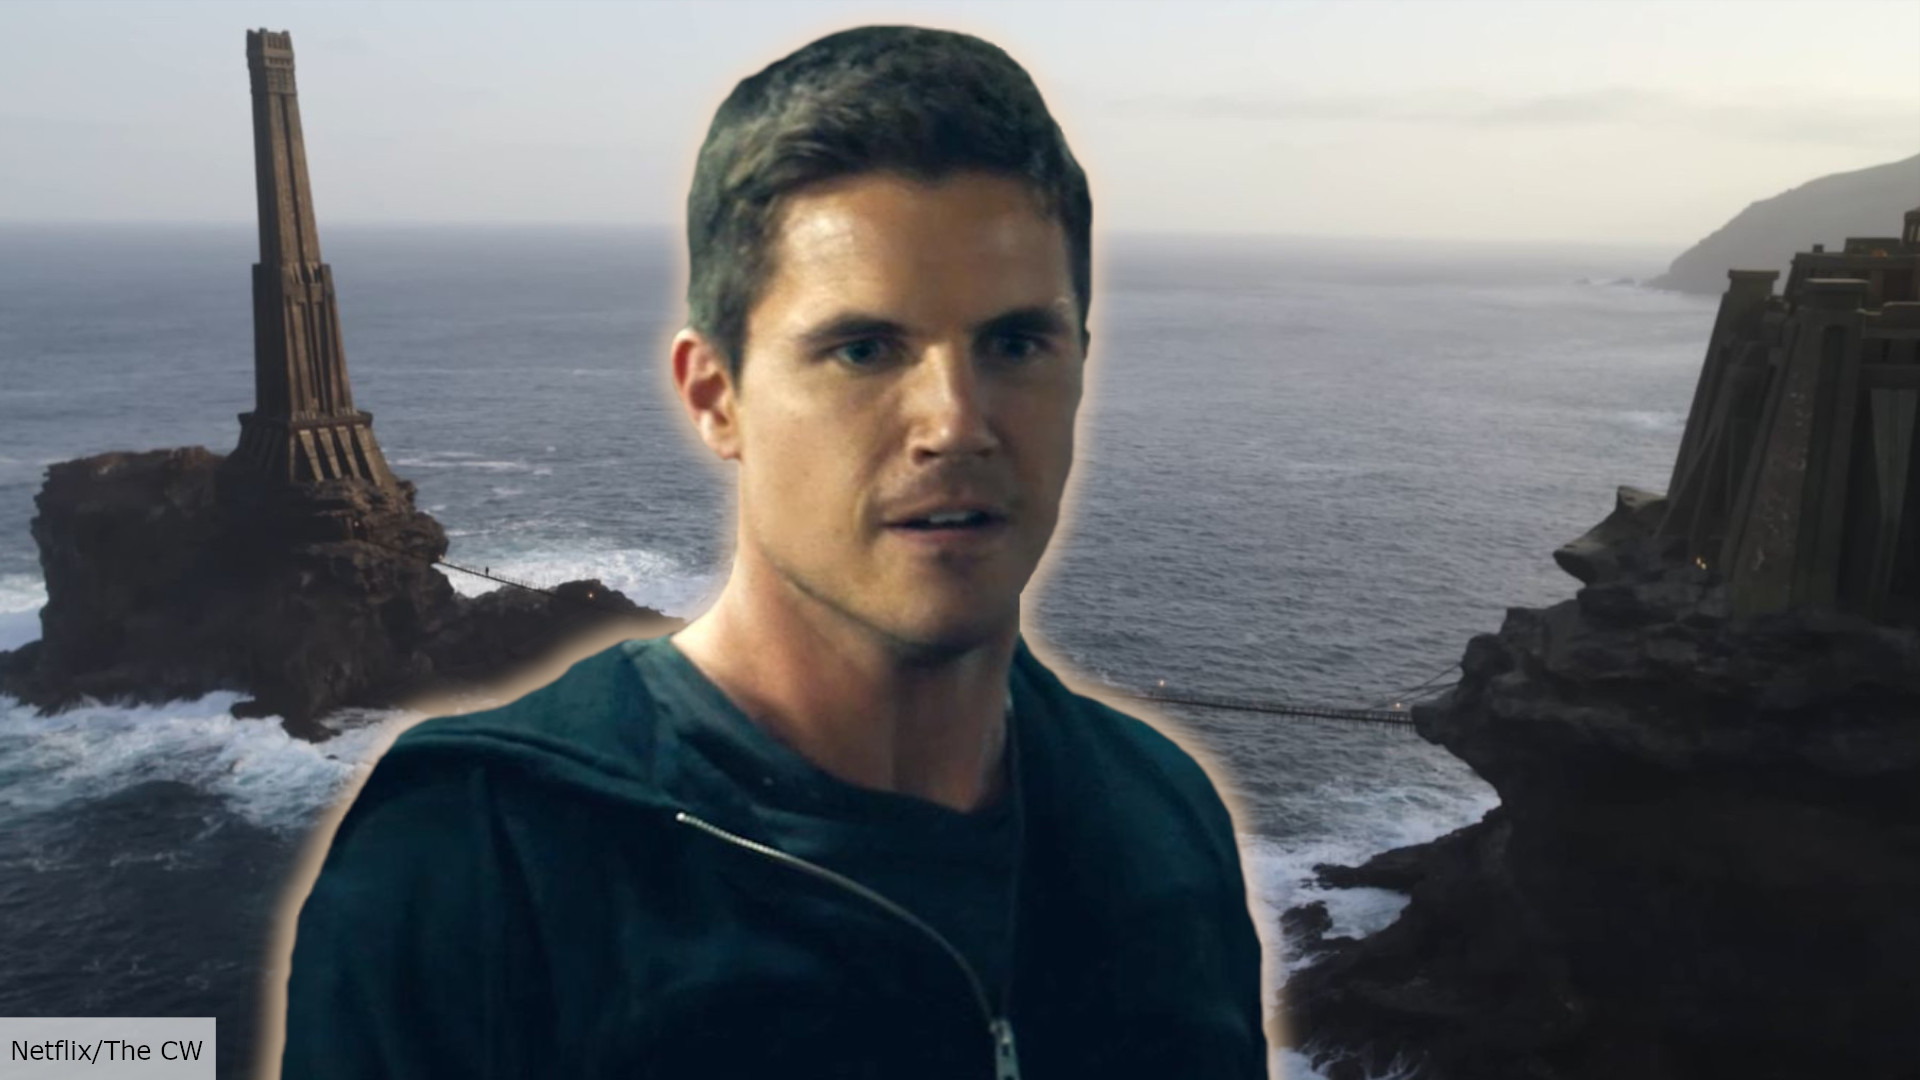 Who Is Gallatin in The Witcher Season 3? Robbie Amell's Character Explained